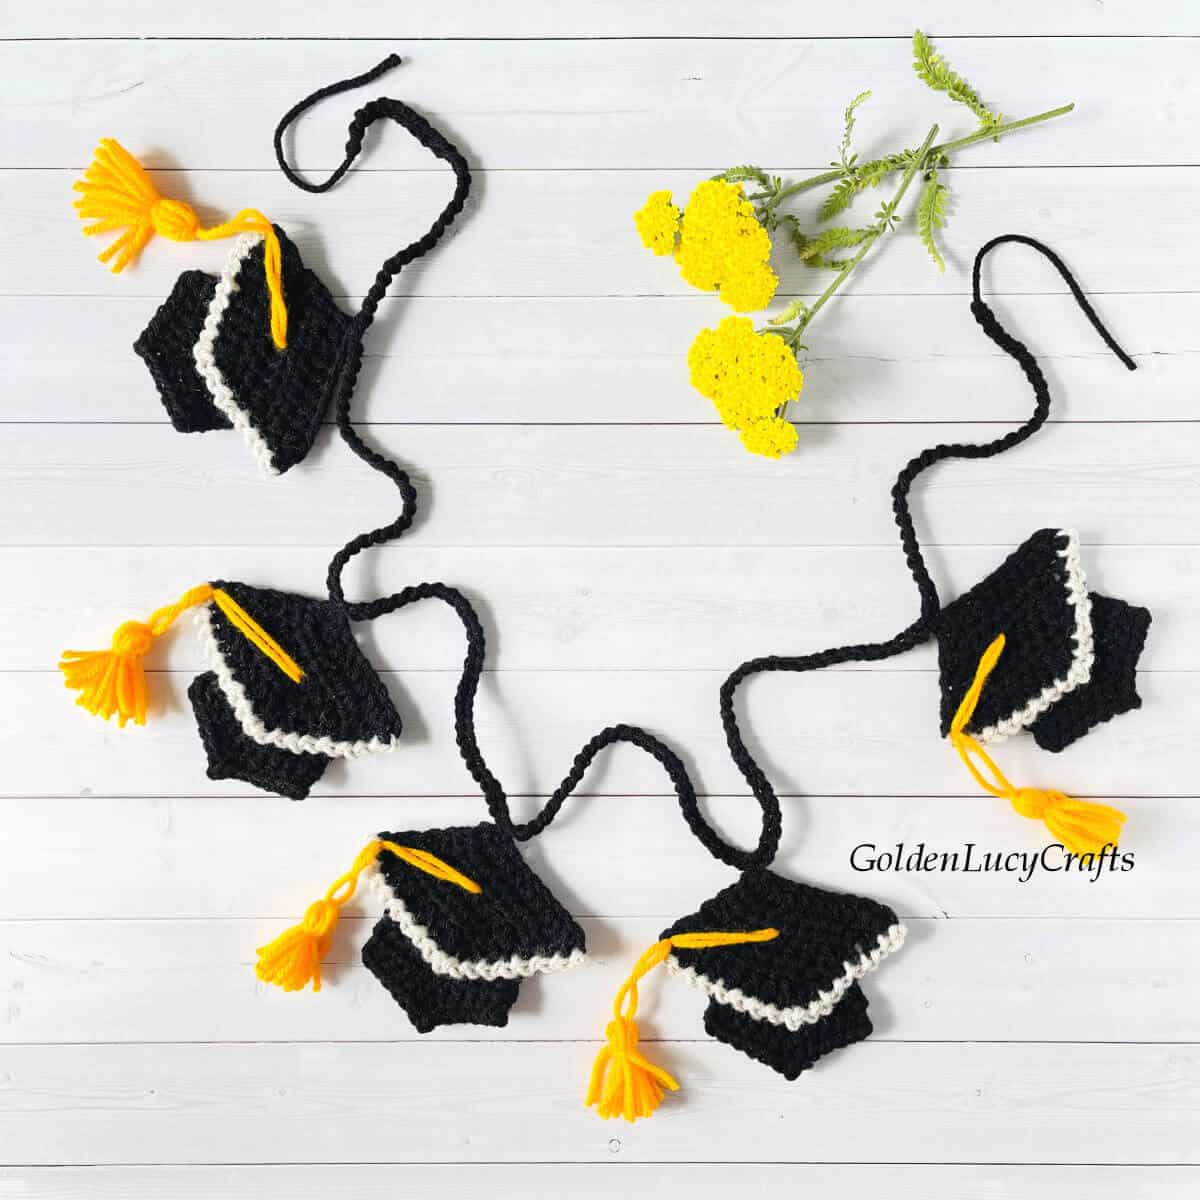 Crocheted graduation garland laying on the surface, yellow flowers in the background.